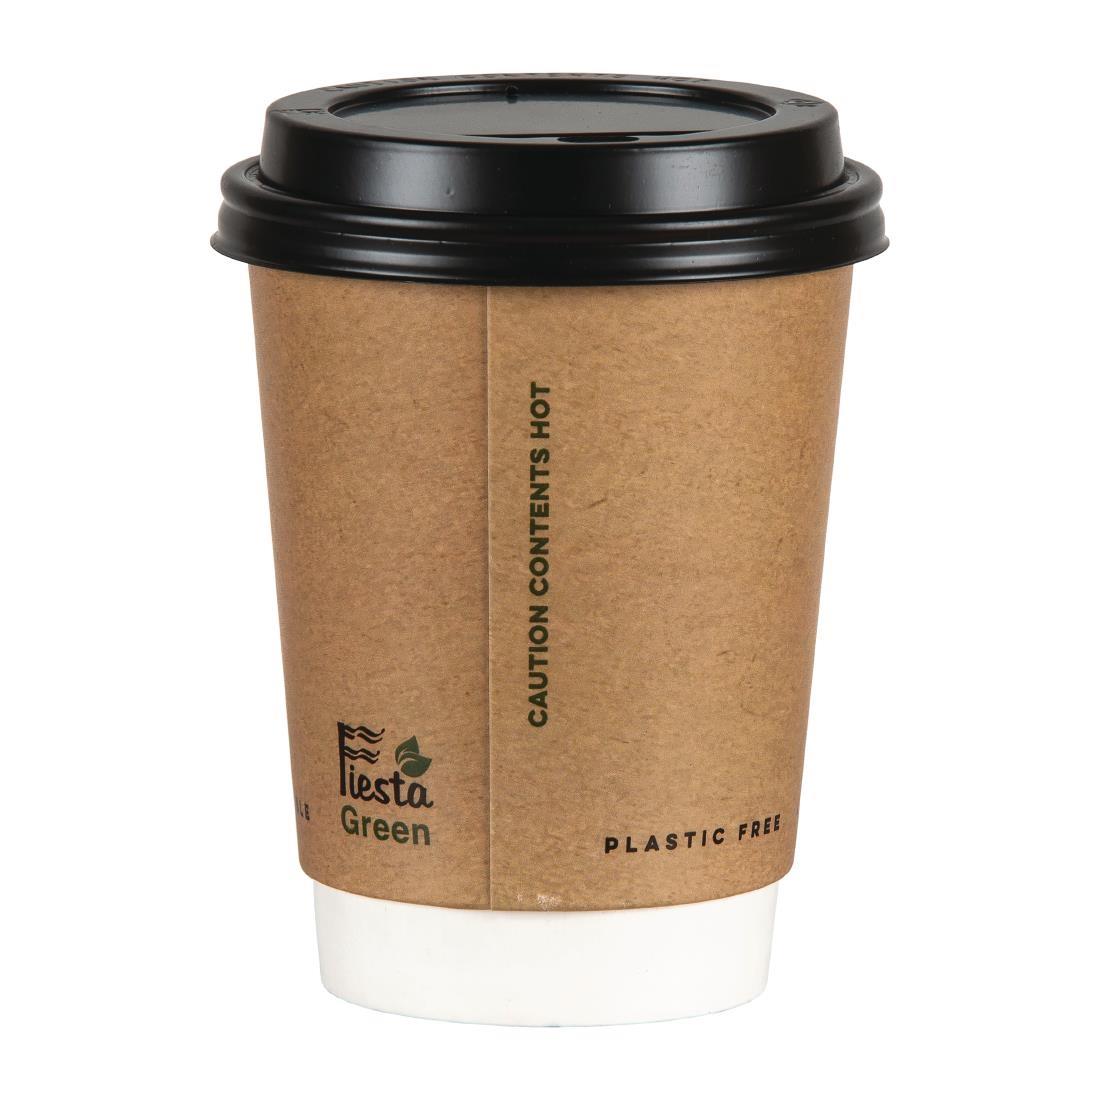 Fiesta Green Plastic-Free Compostable Hot Cups Double Wall 340ml / 12oz x 500 - FB953  - 6